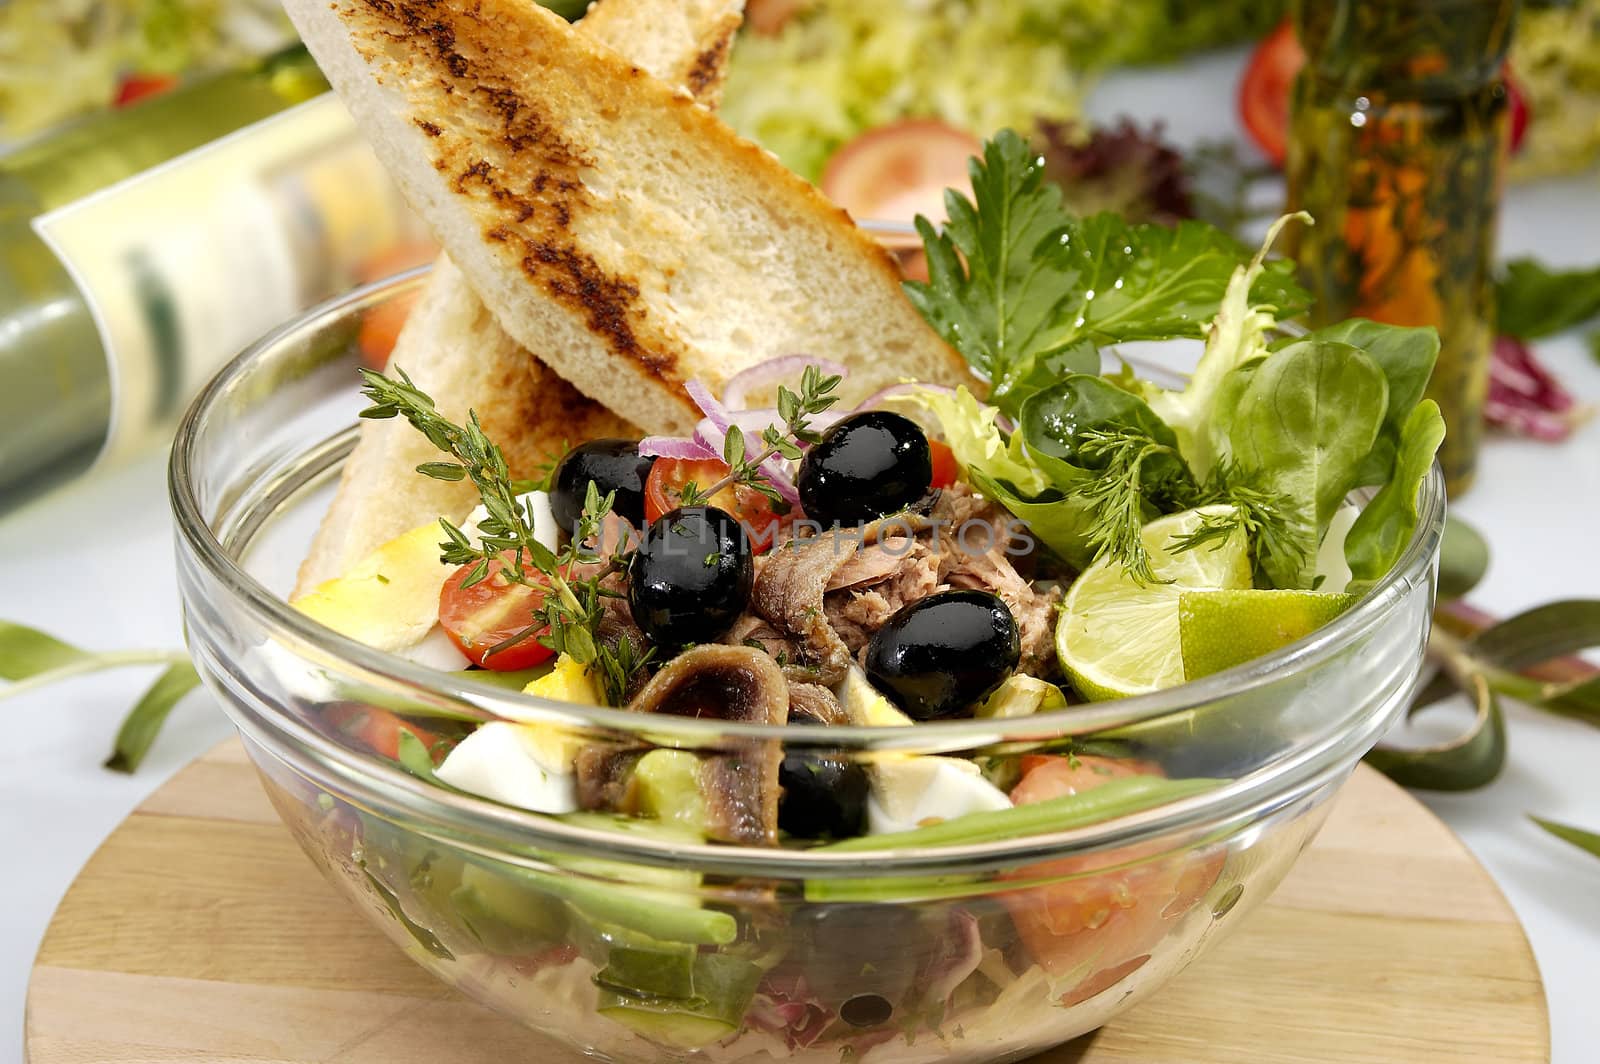 Anchovy salad w olives and french bread